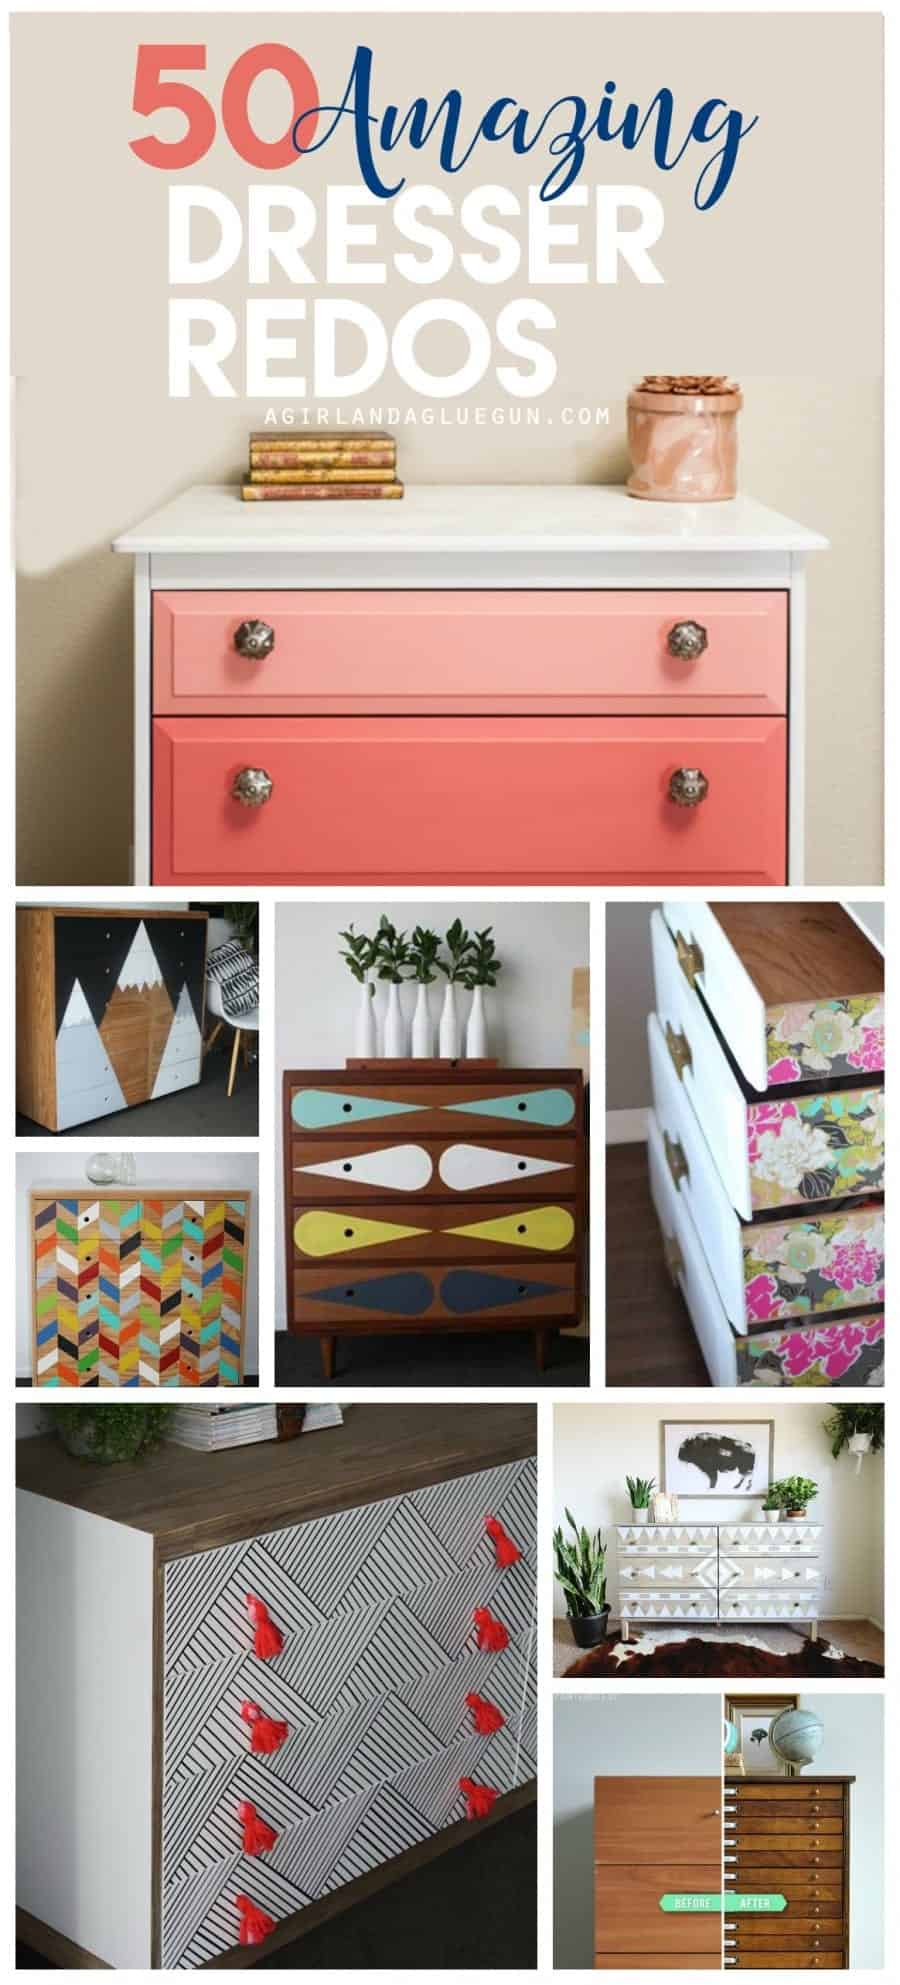 over 50 amazing dresser redos and up-cycles that you can diy at home